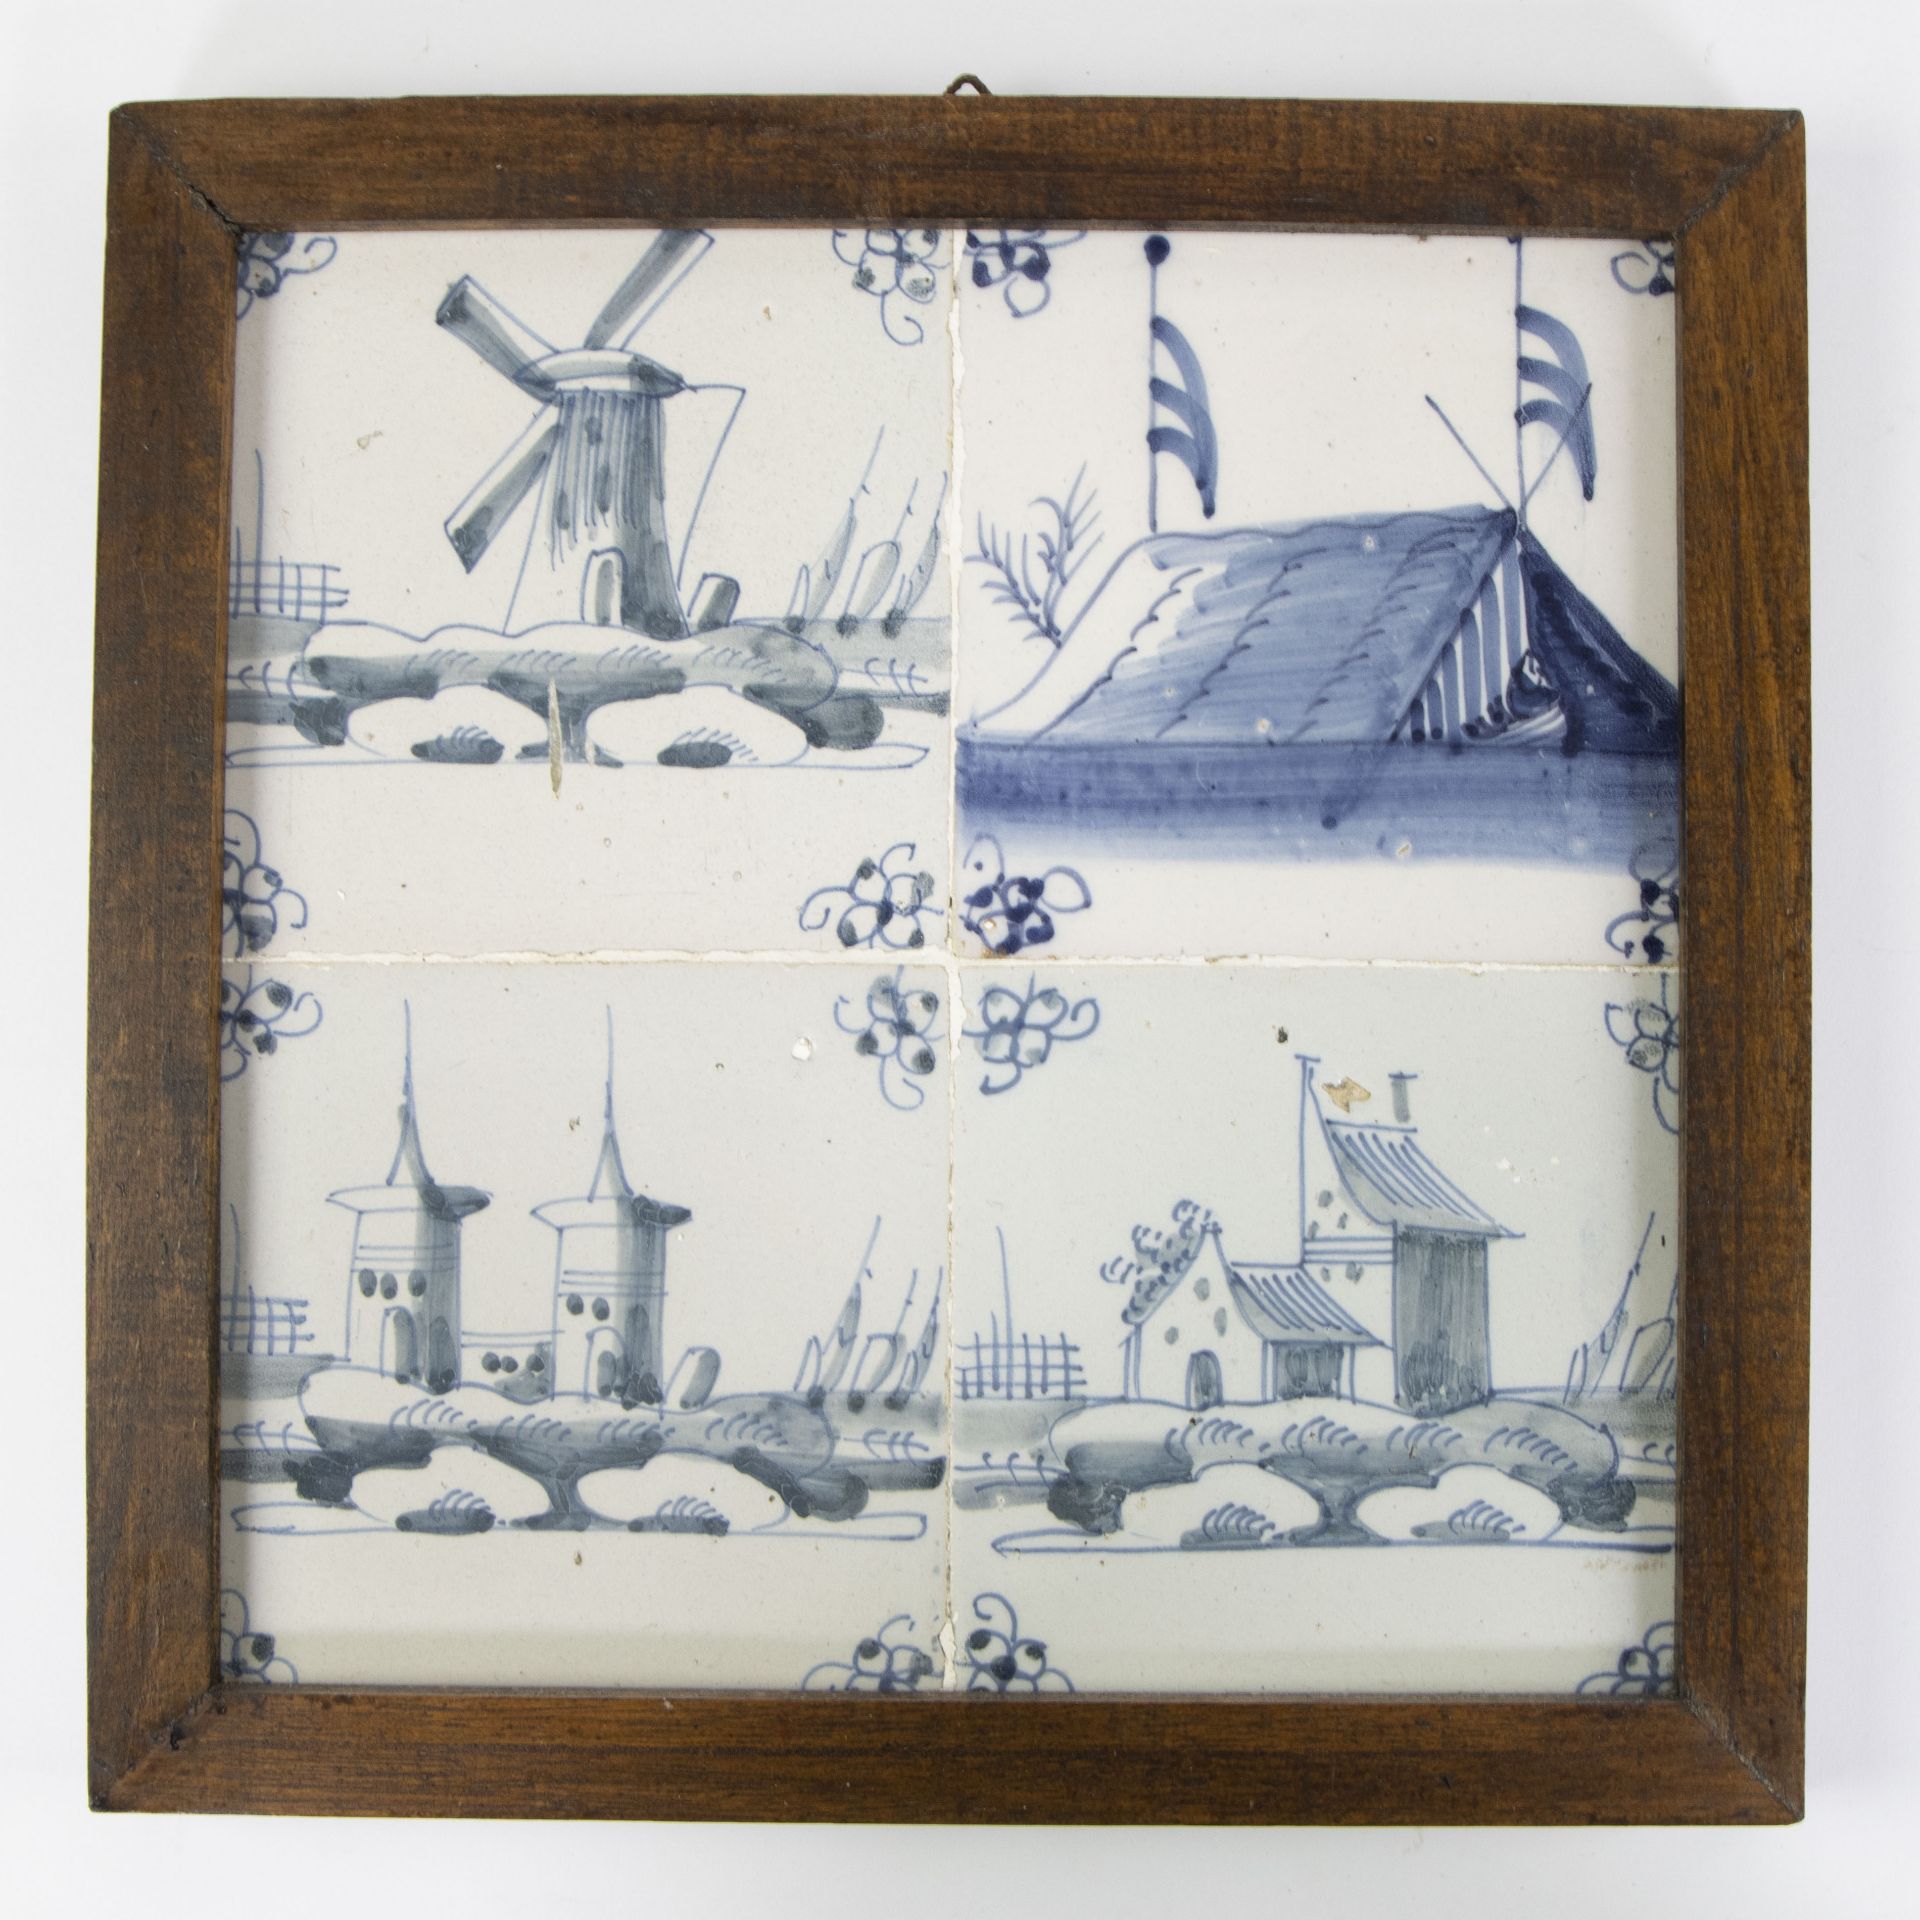 Lot of Delft blue and white tiles, 18/19th C. - Image 3 of 3